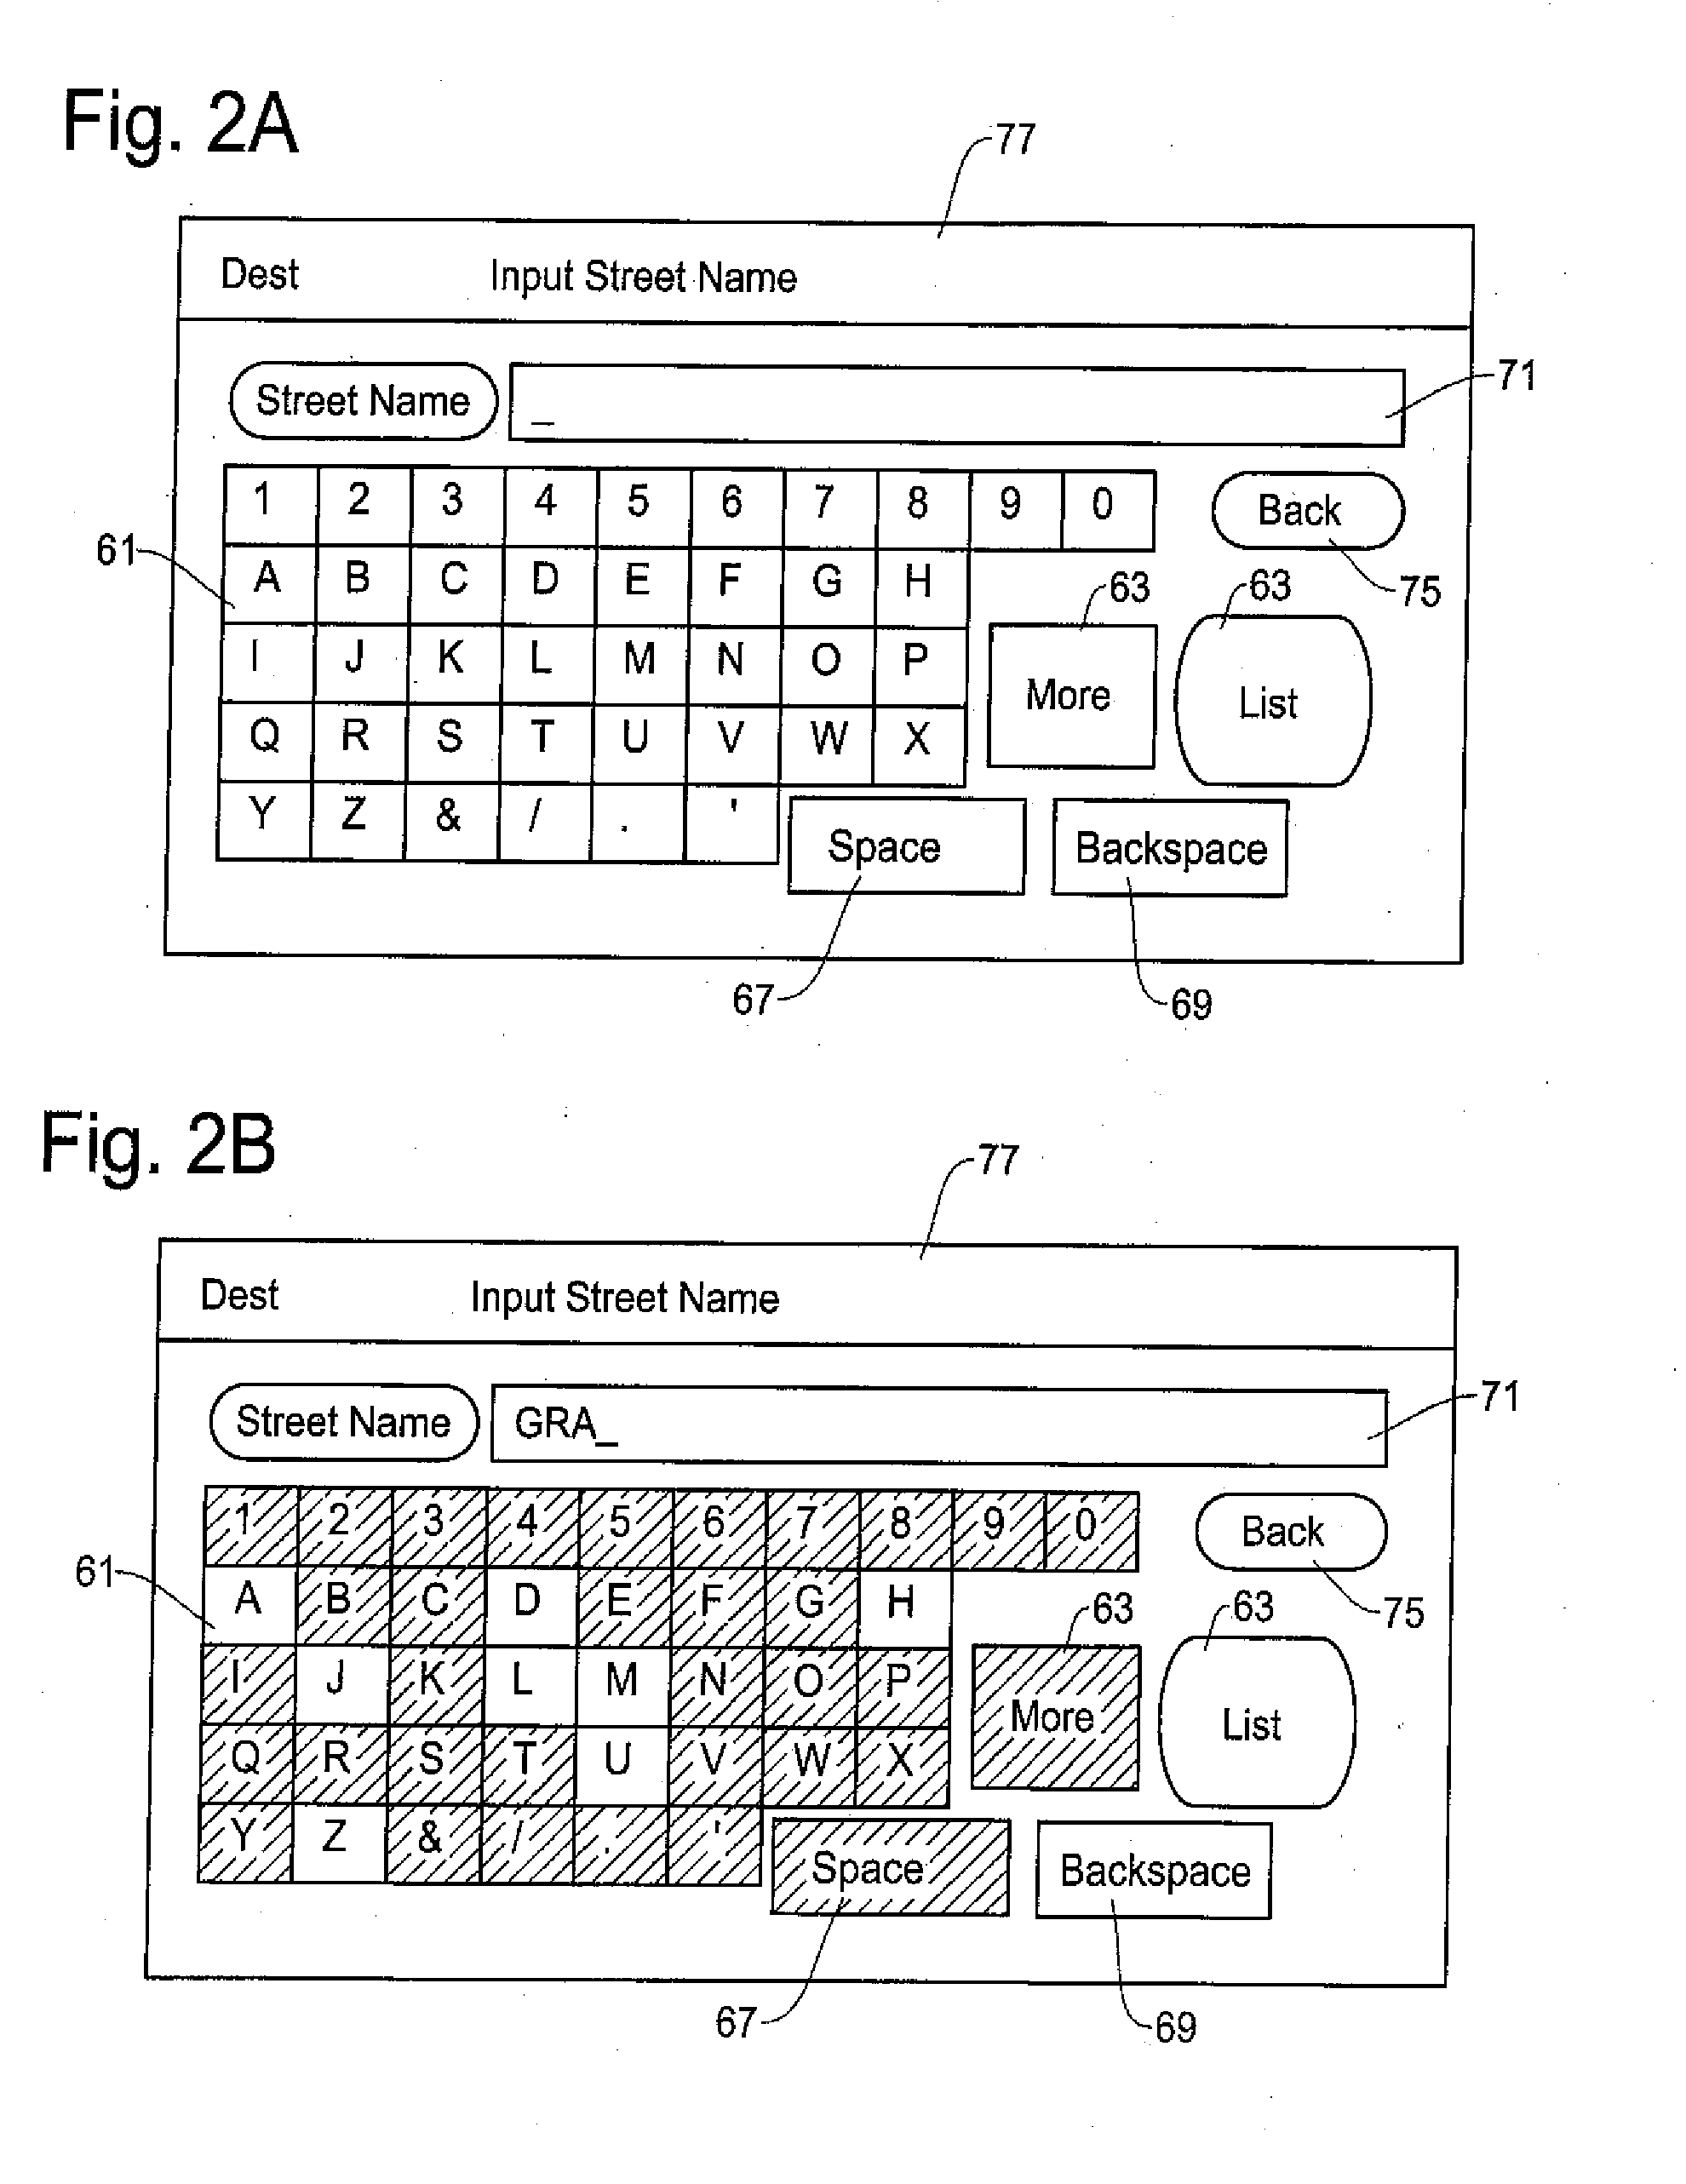 Method and apparatus for keyboard arrangement for efficient data entry for navigation system